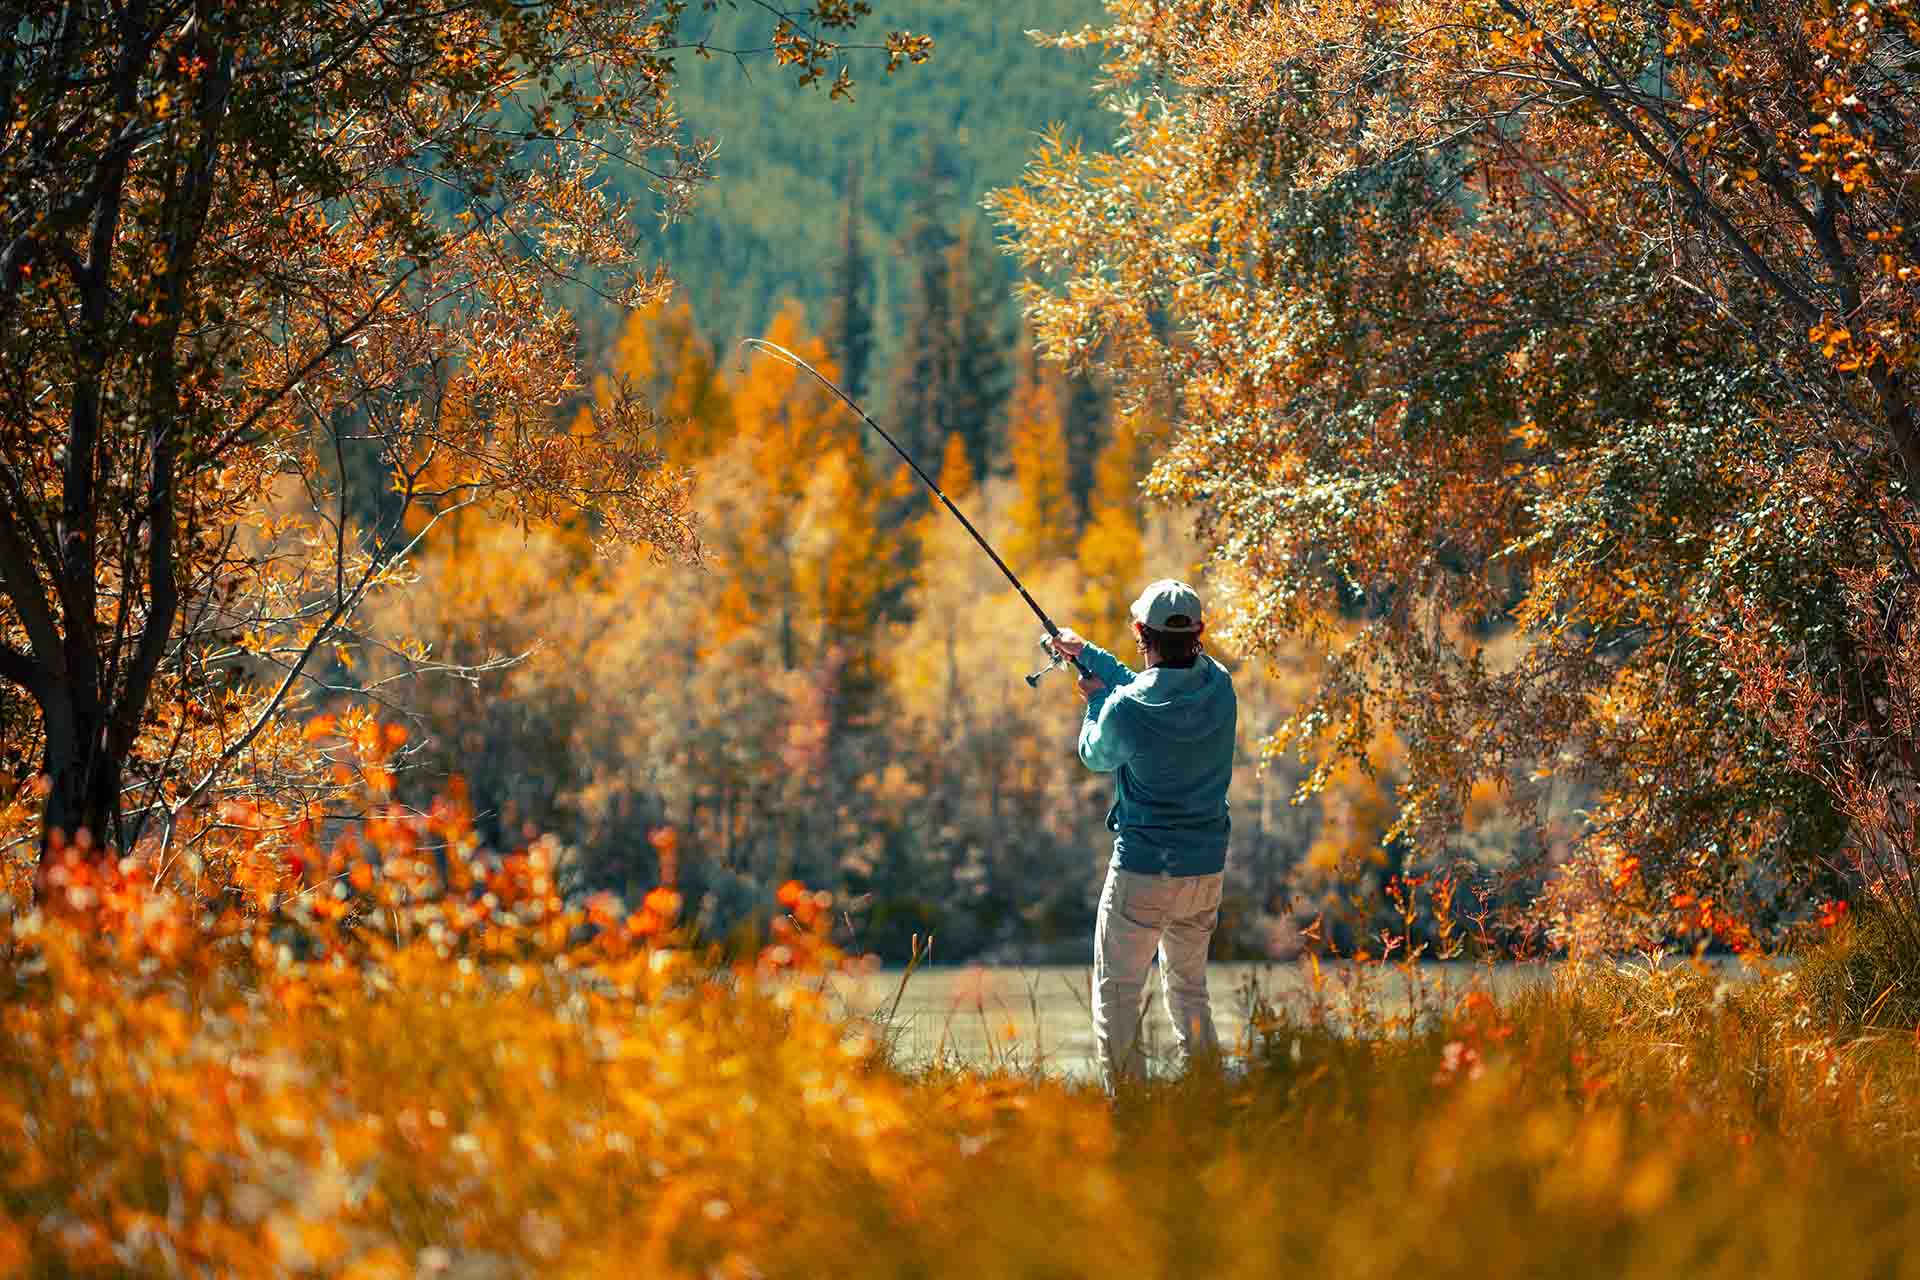 Angler fishing on the river during autumn